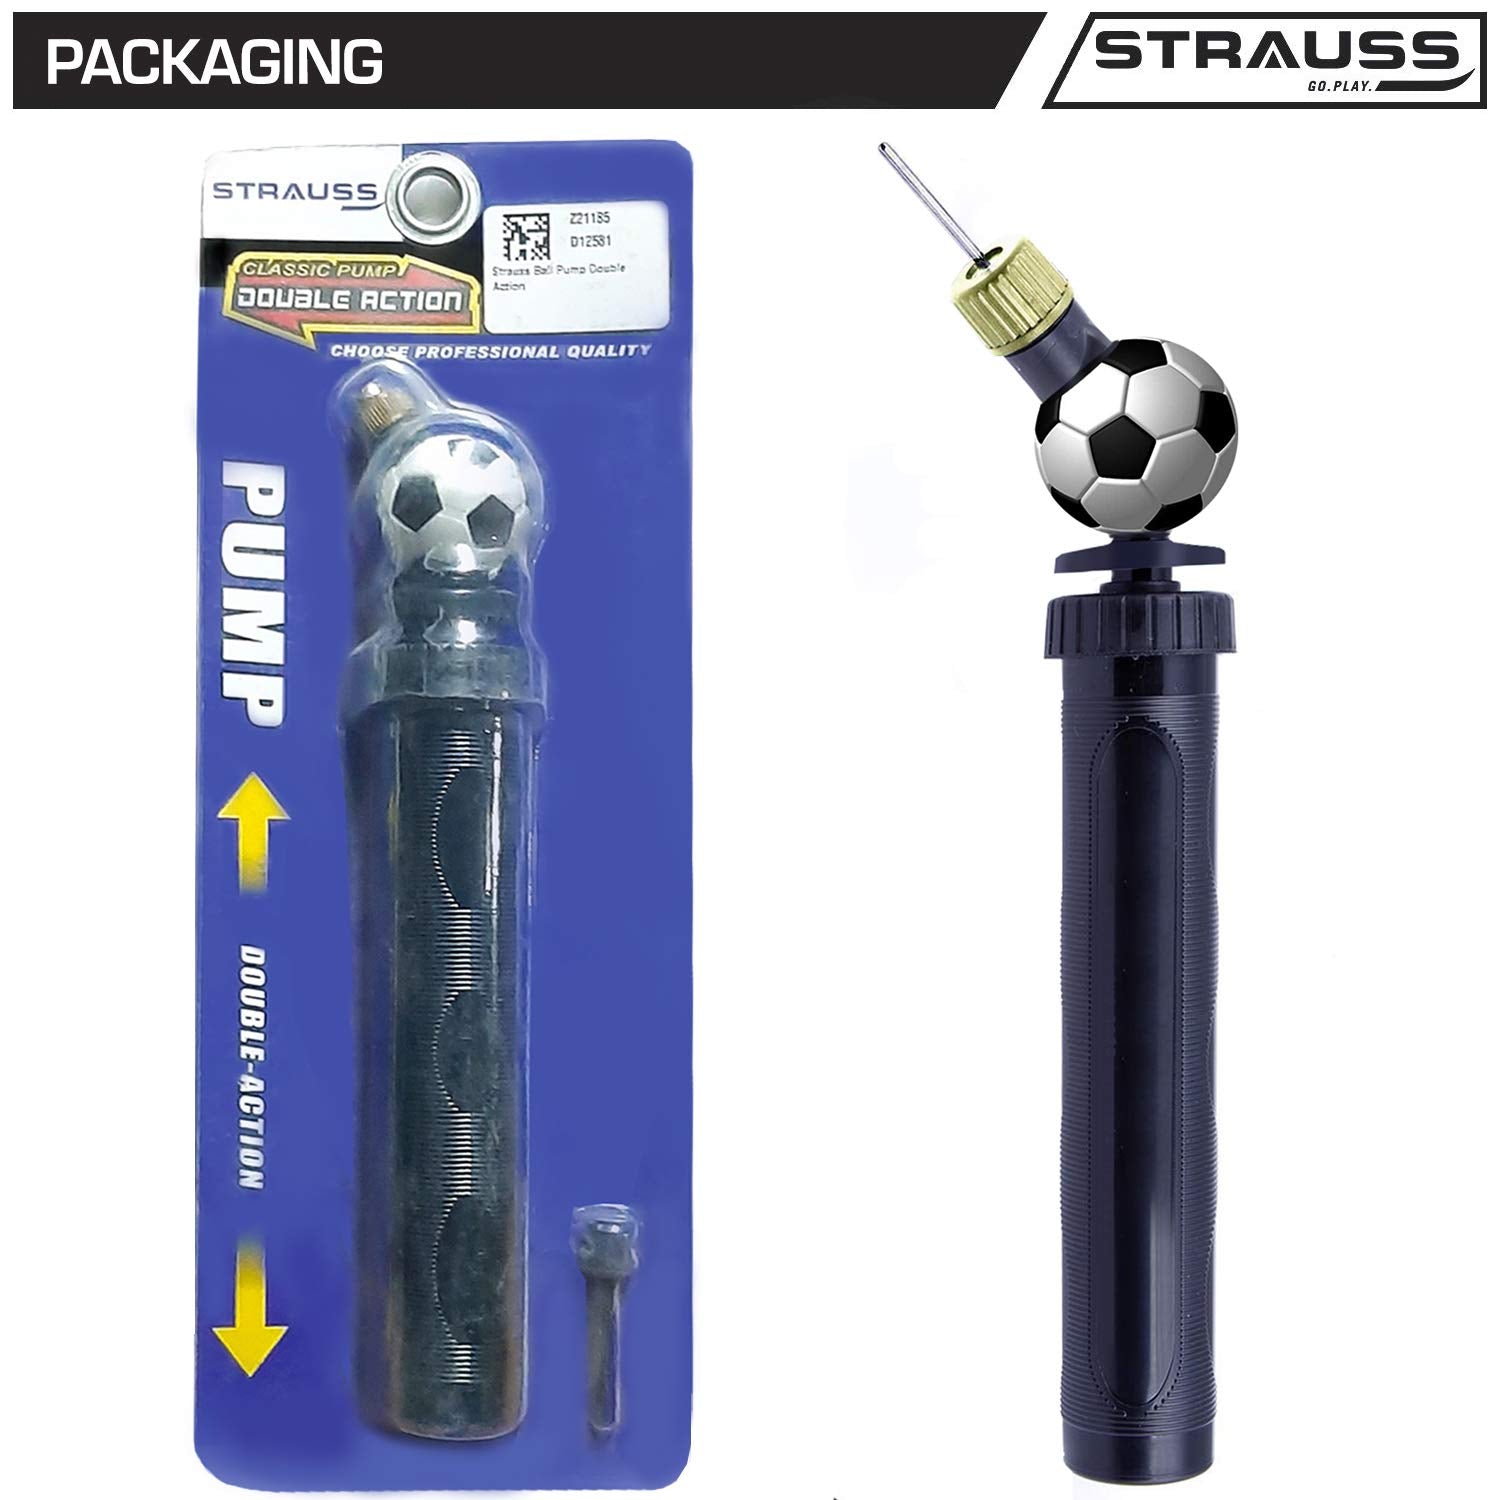 Strauss Ball Pump Double Action